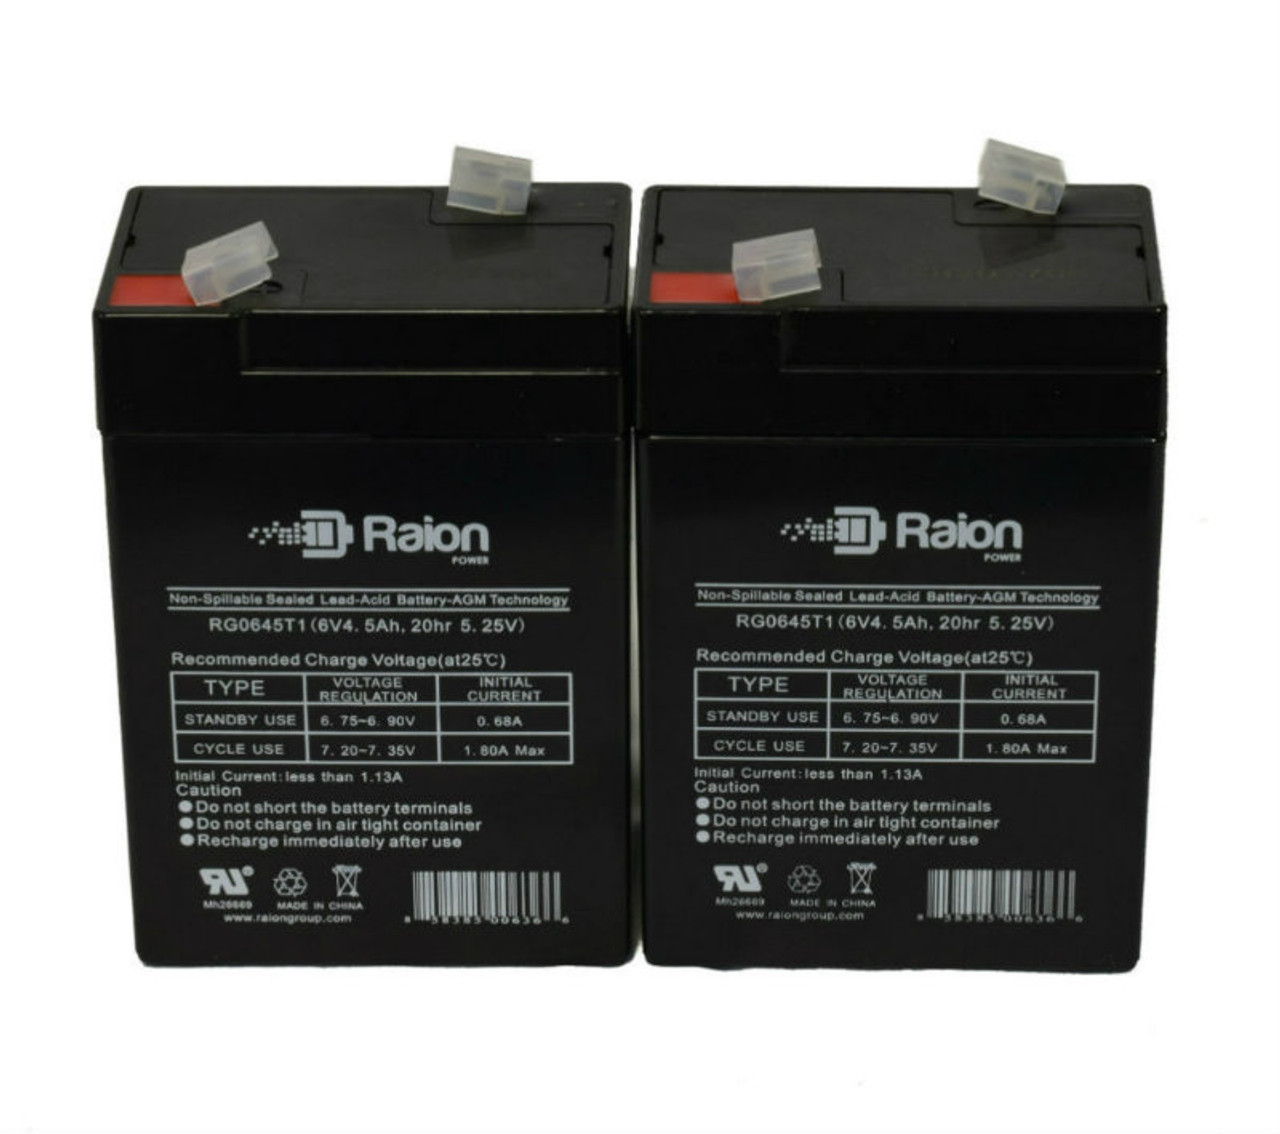 Raion Power 6V 4.5Ah Replacement Emergency Light Battery for Dual-Lite LZ2 - 2 Pack